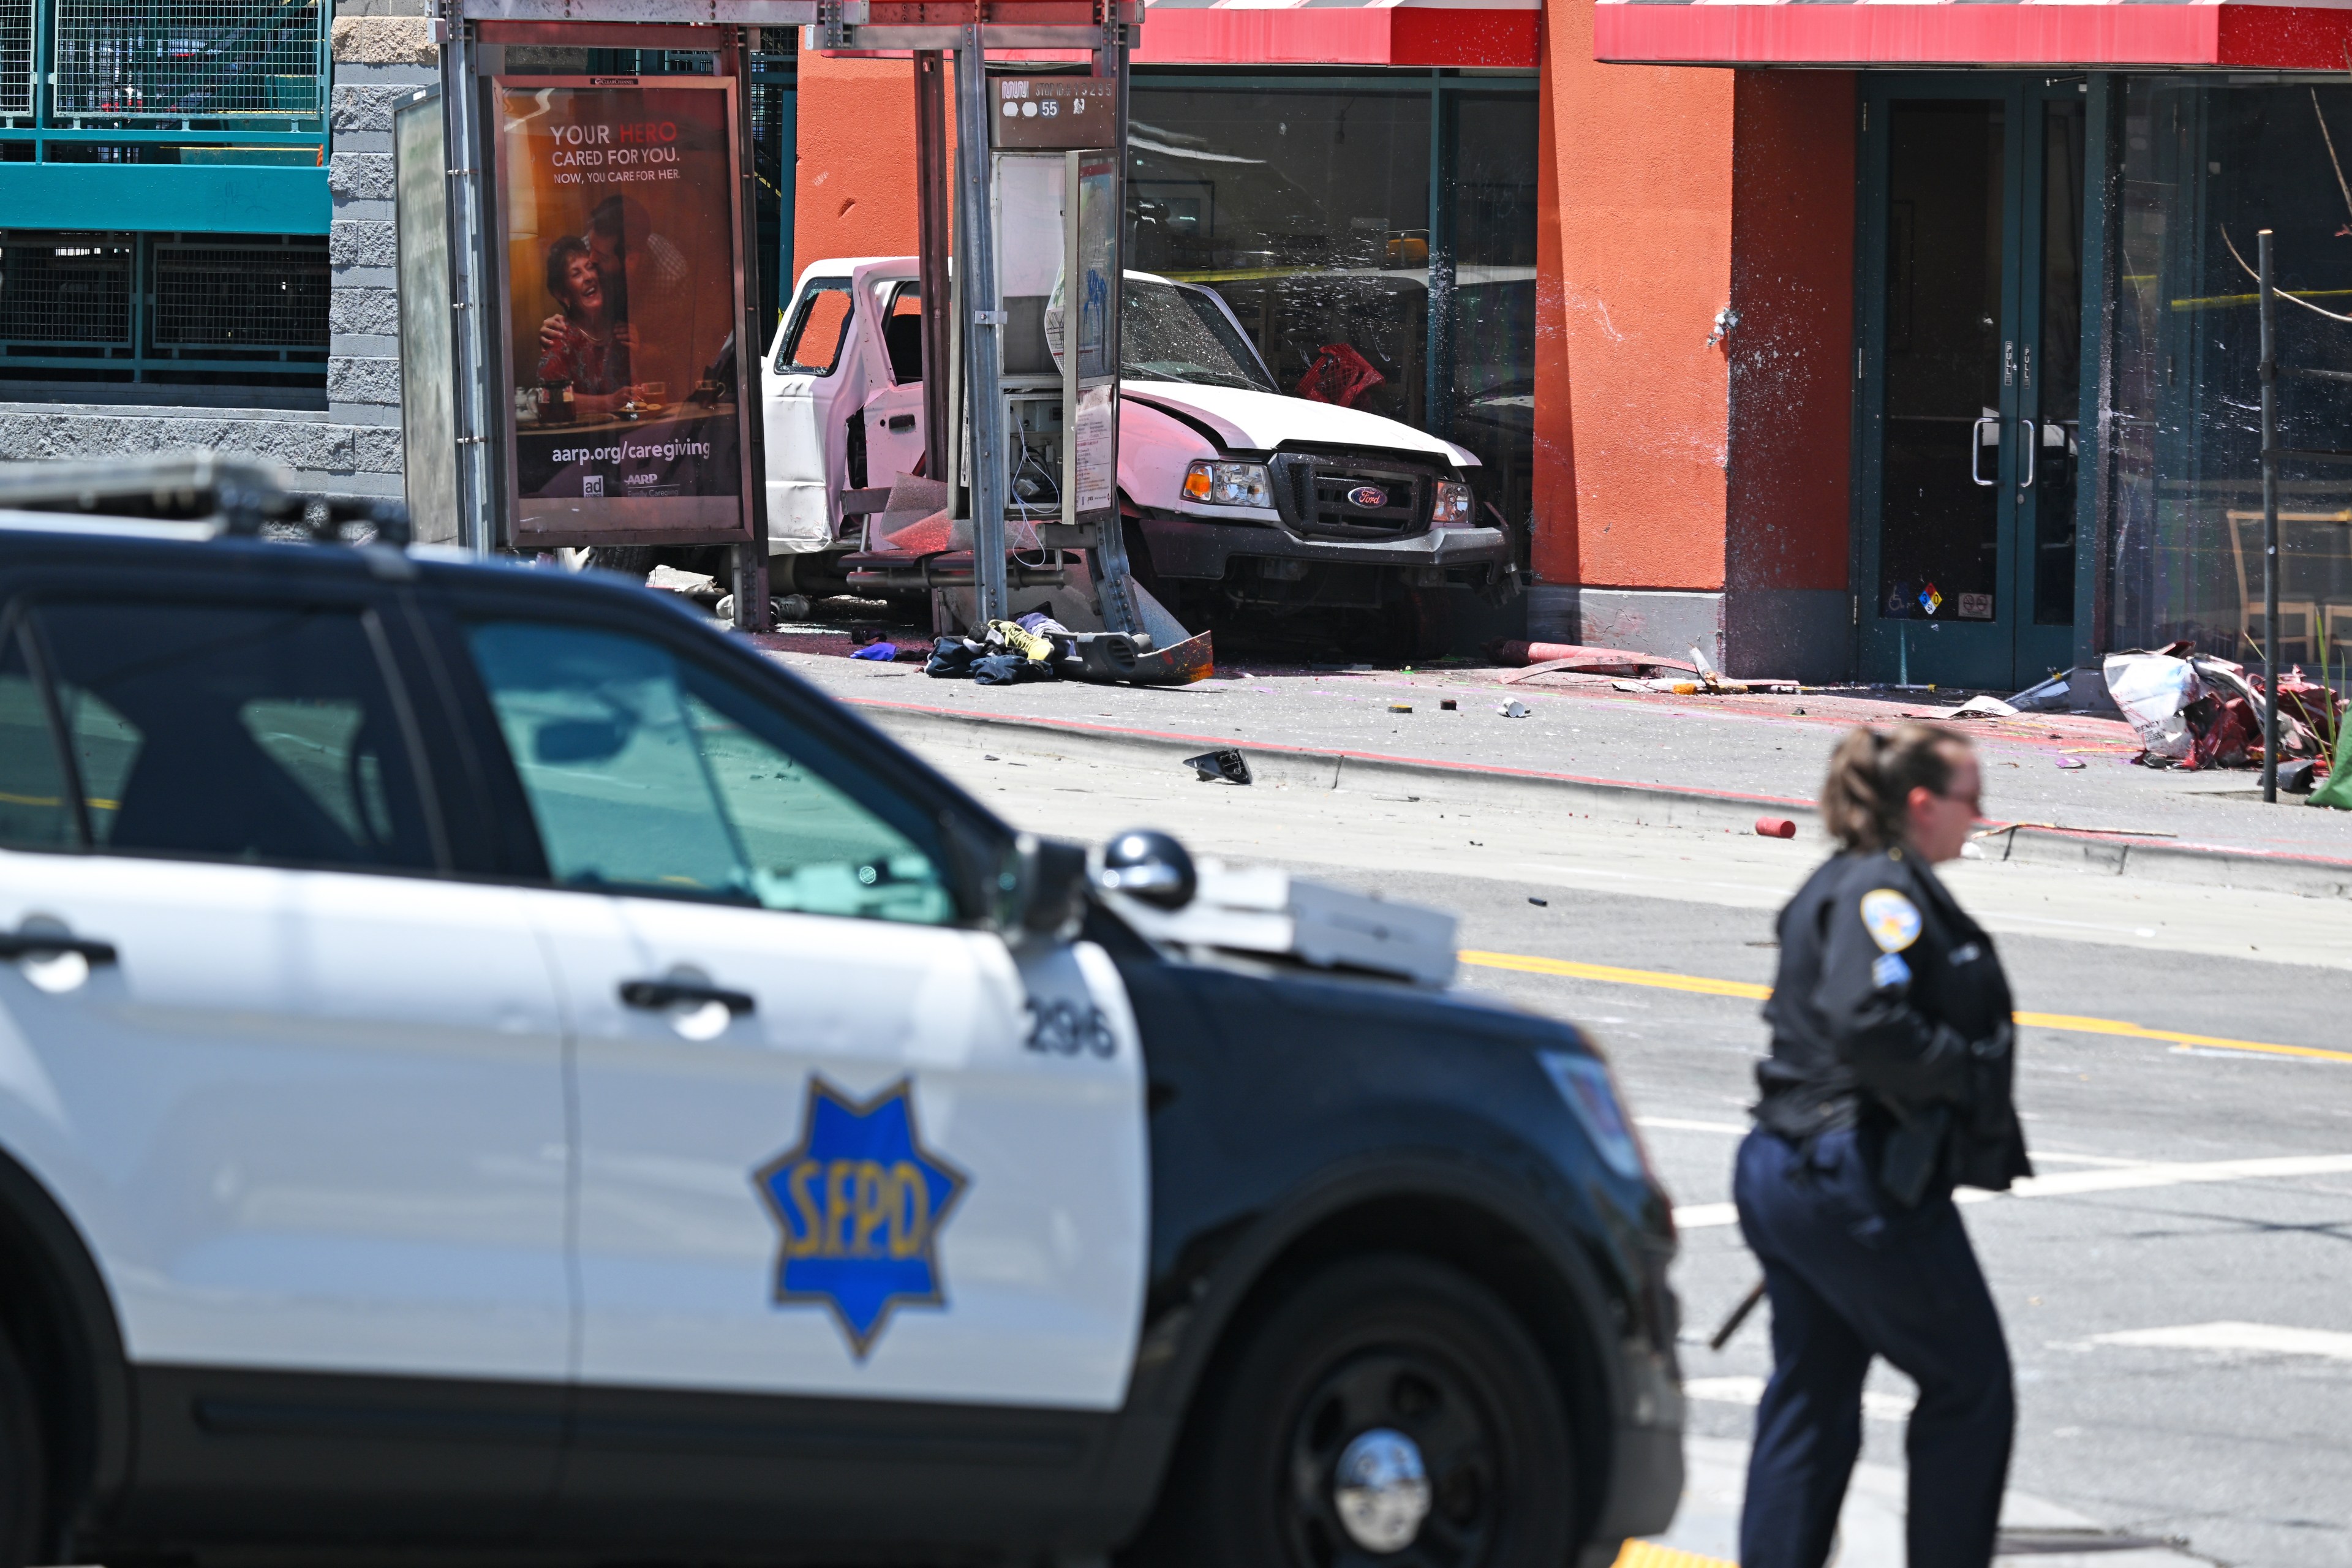 In the background, a white Ford truck is crashed into a bus stop and a retail building. In the foreground, a police officer, who has just exited her vehicle, approaches on foot.